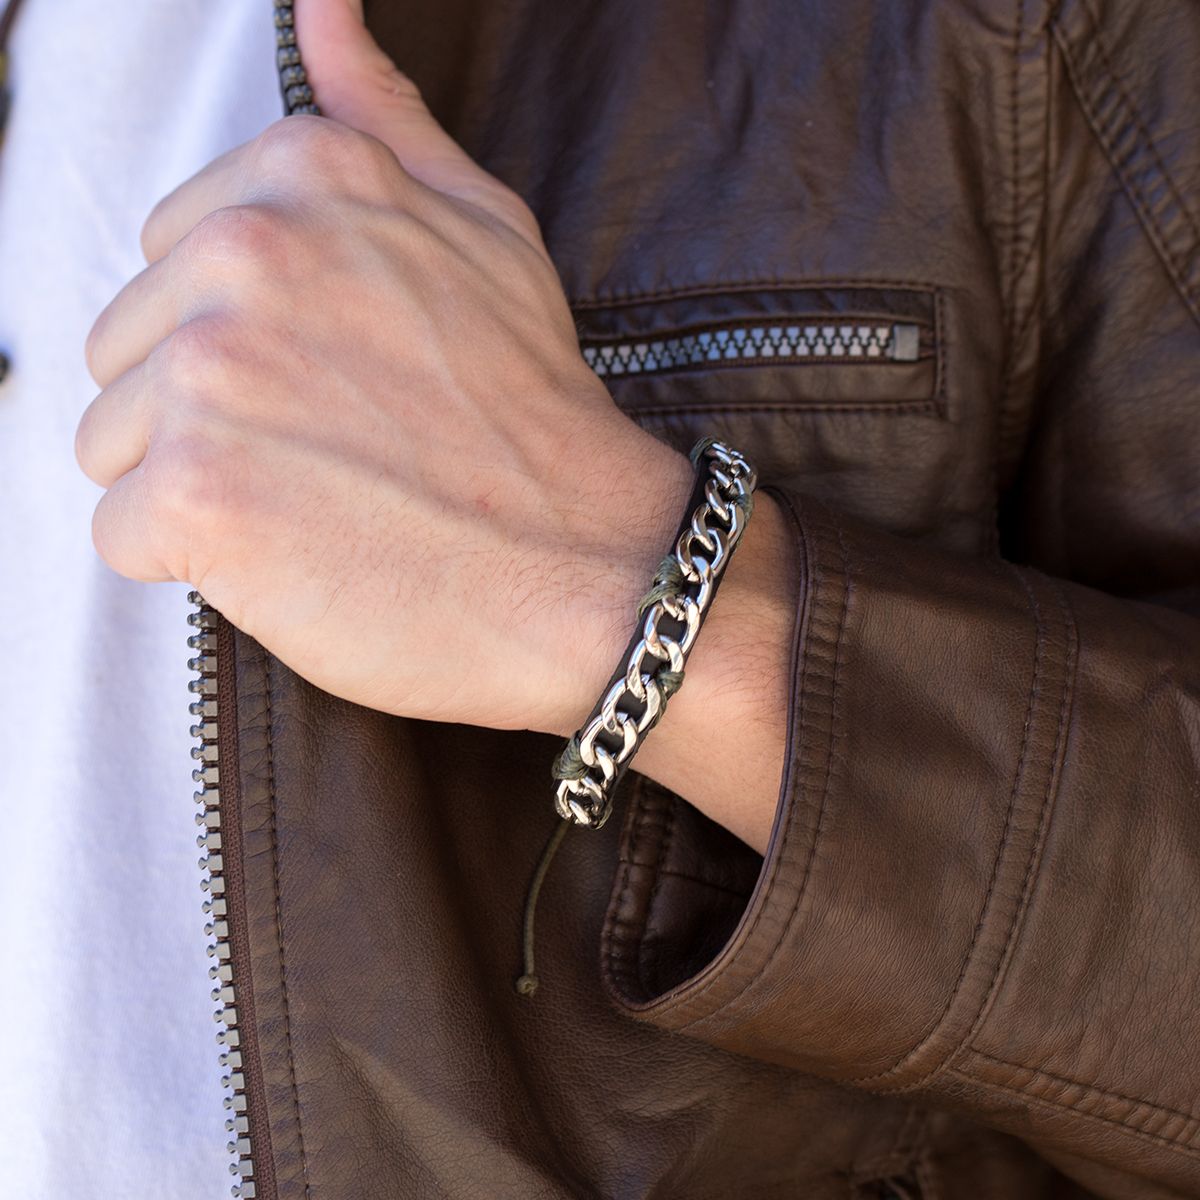 black leather band with chain bracelet on a person's wrist.